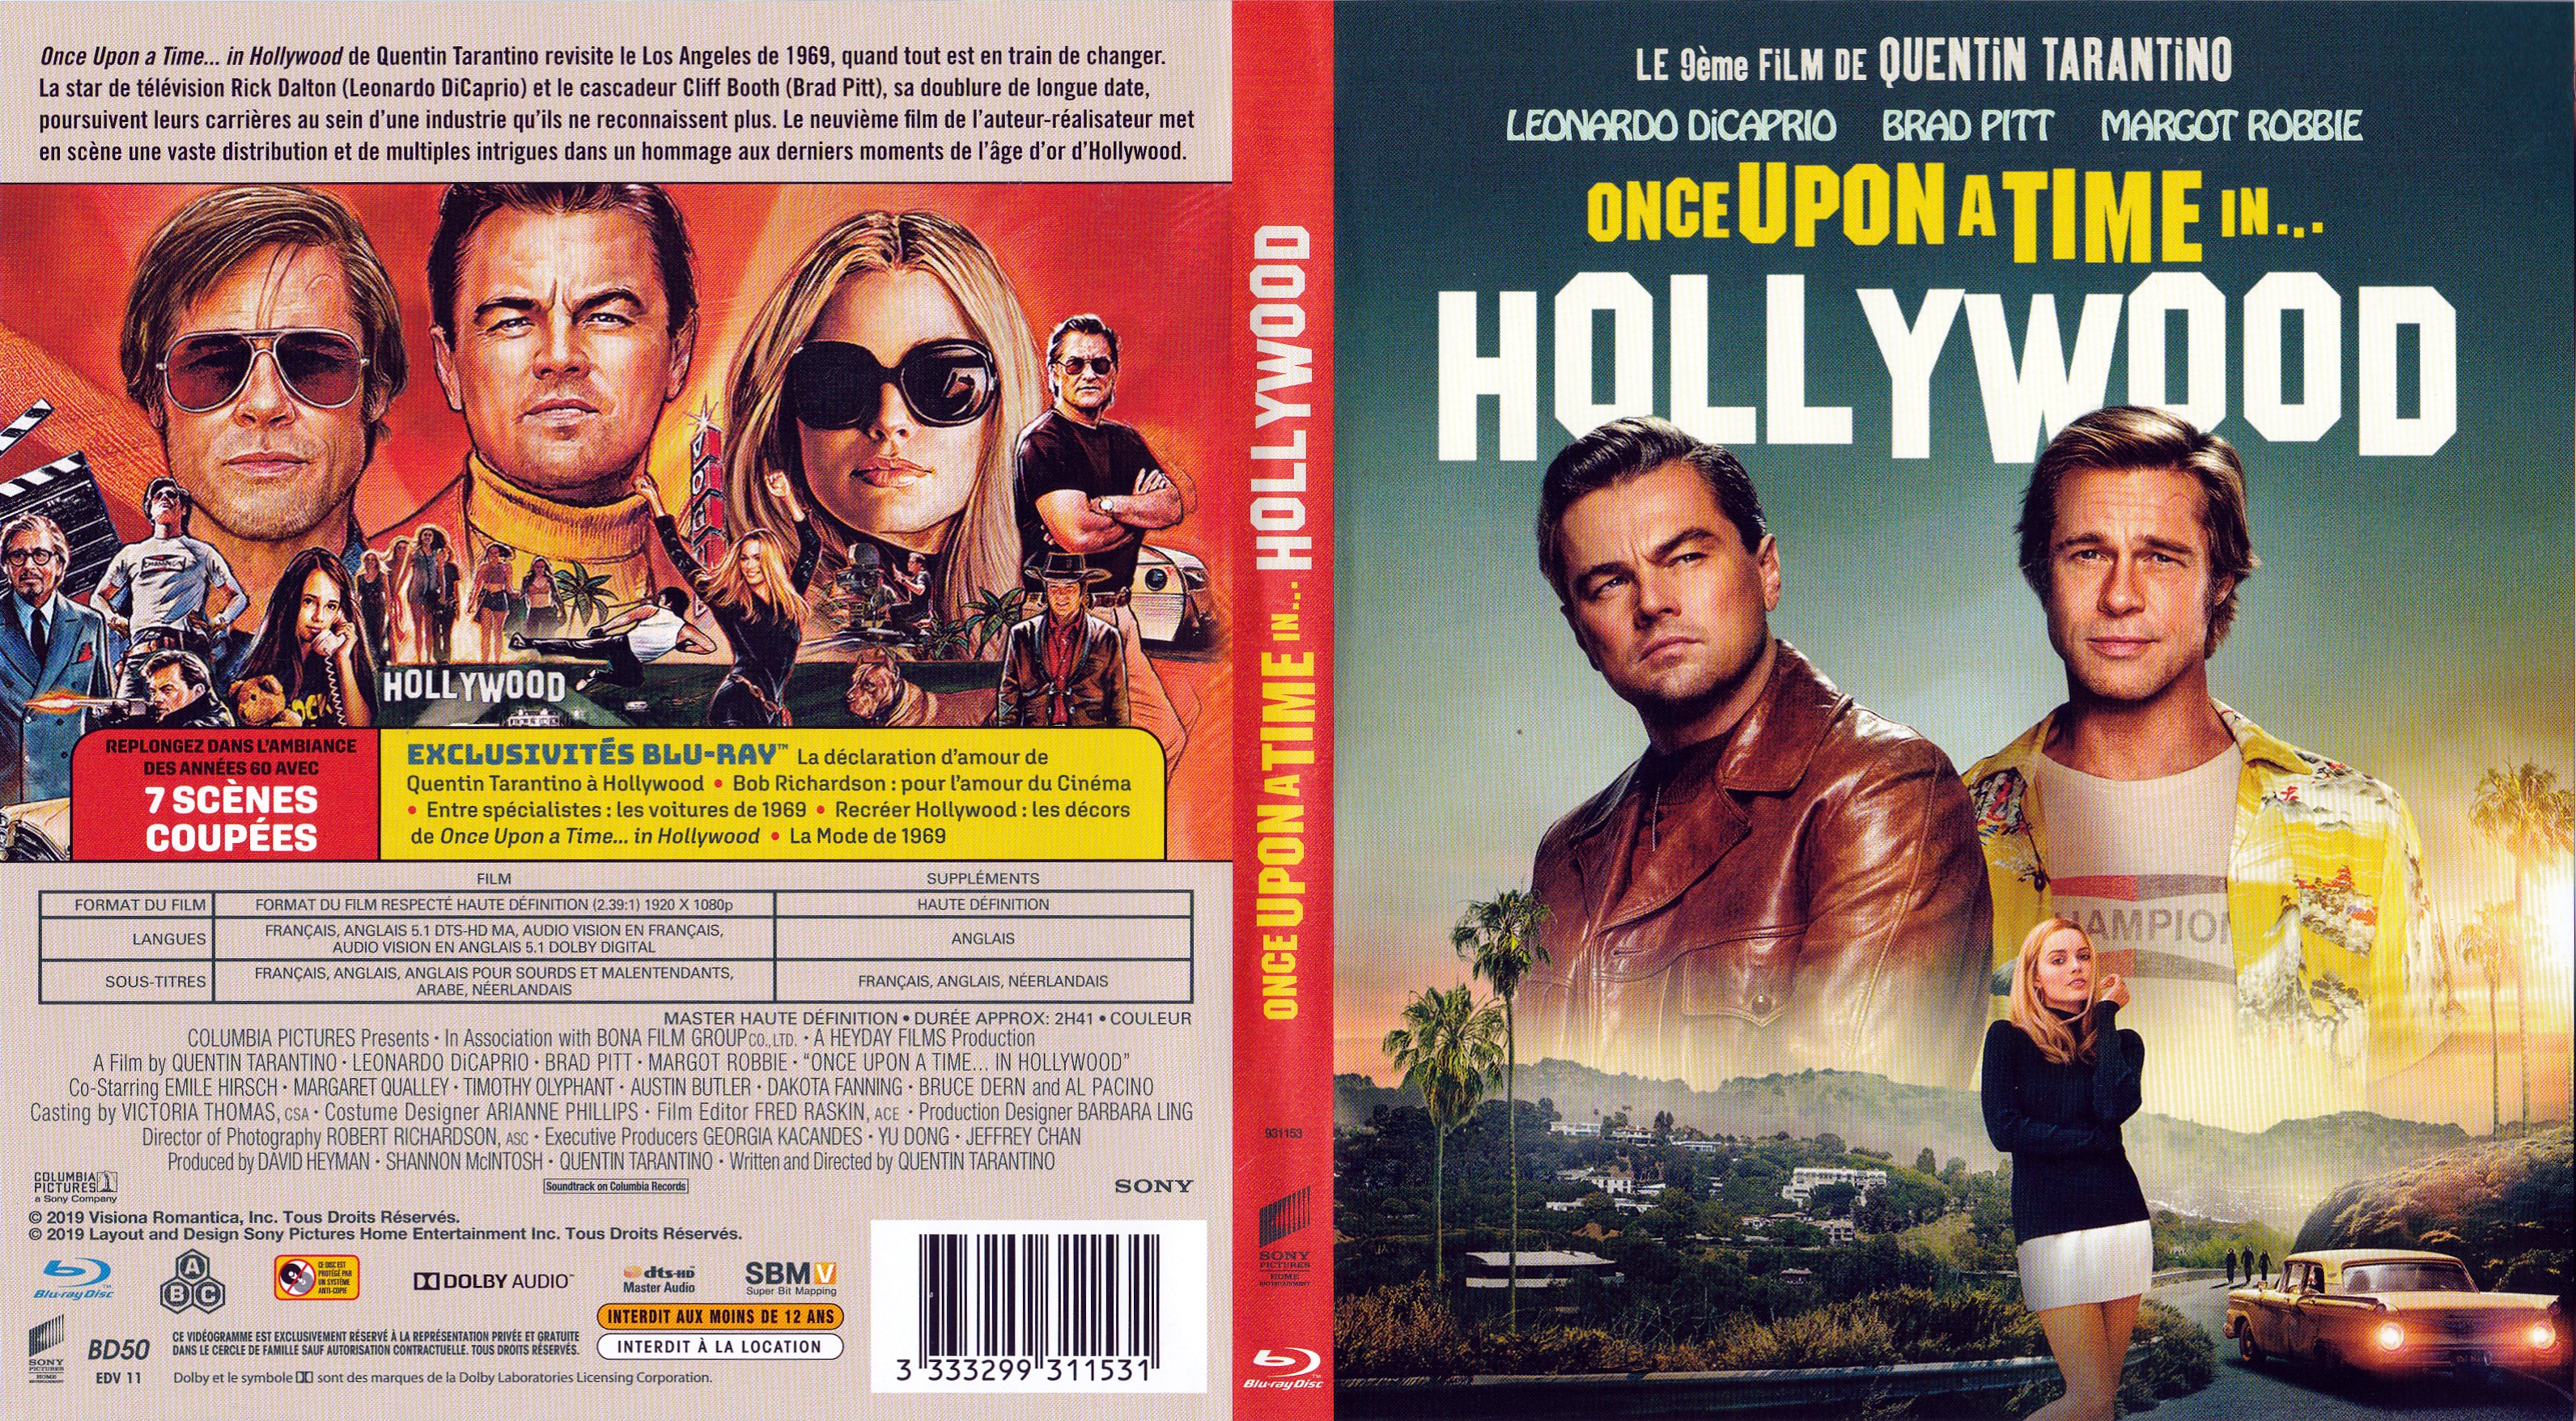 Jaquette DVD Once upon a time in Hollywood (BLU-RAY)